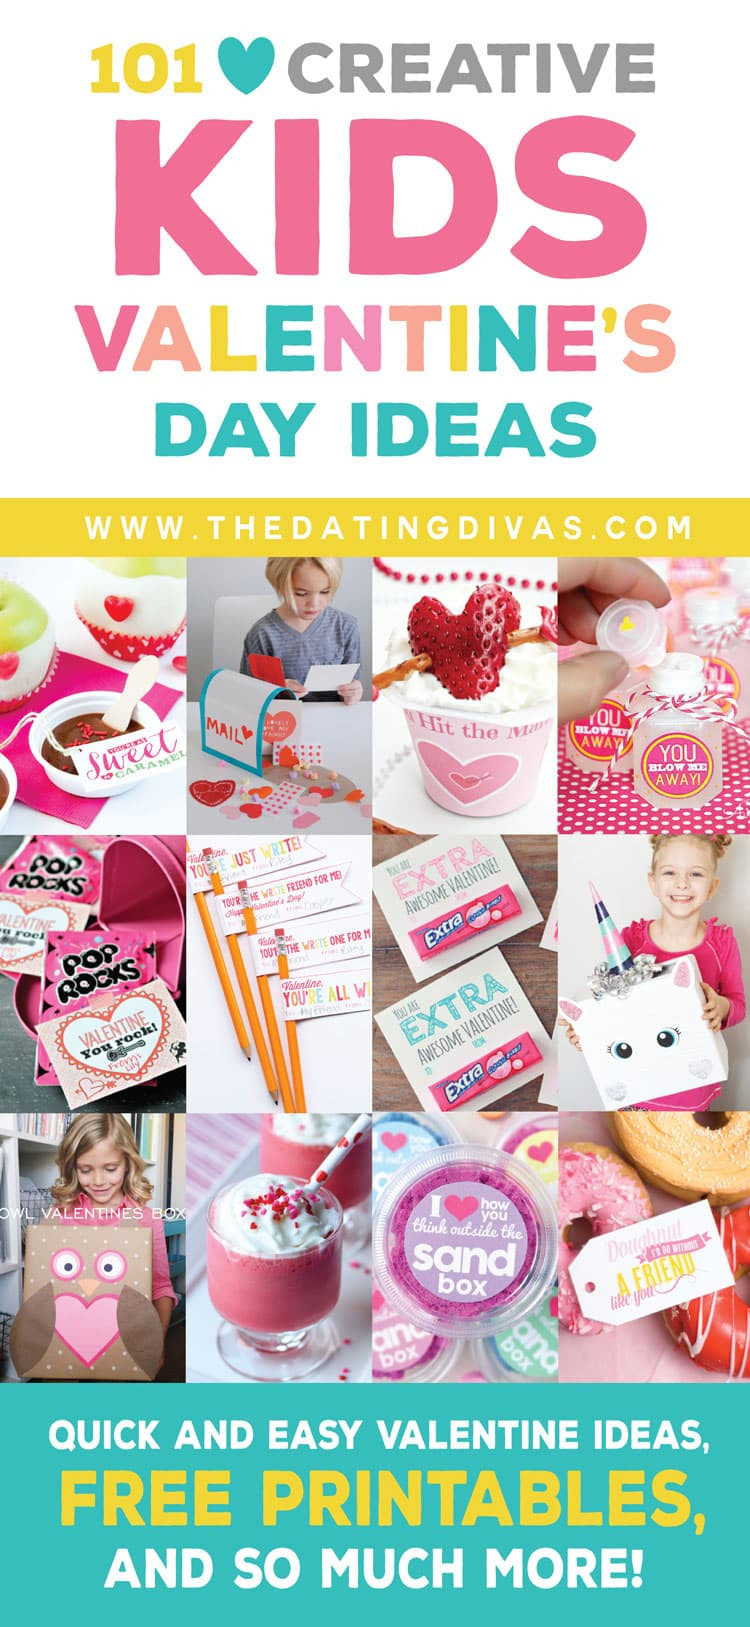 Toddler Valentines Day Gift Ideas
 100 Kids Valentine s Day Ideas Treats Gifts & More